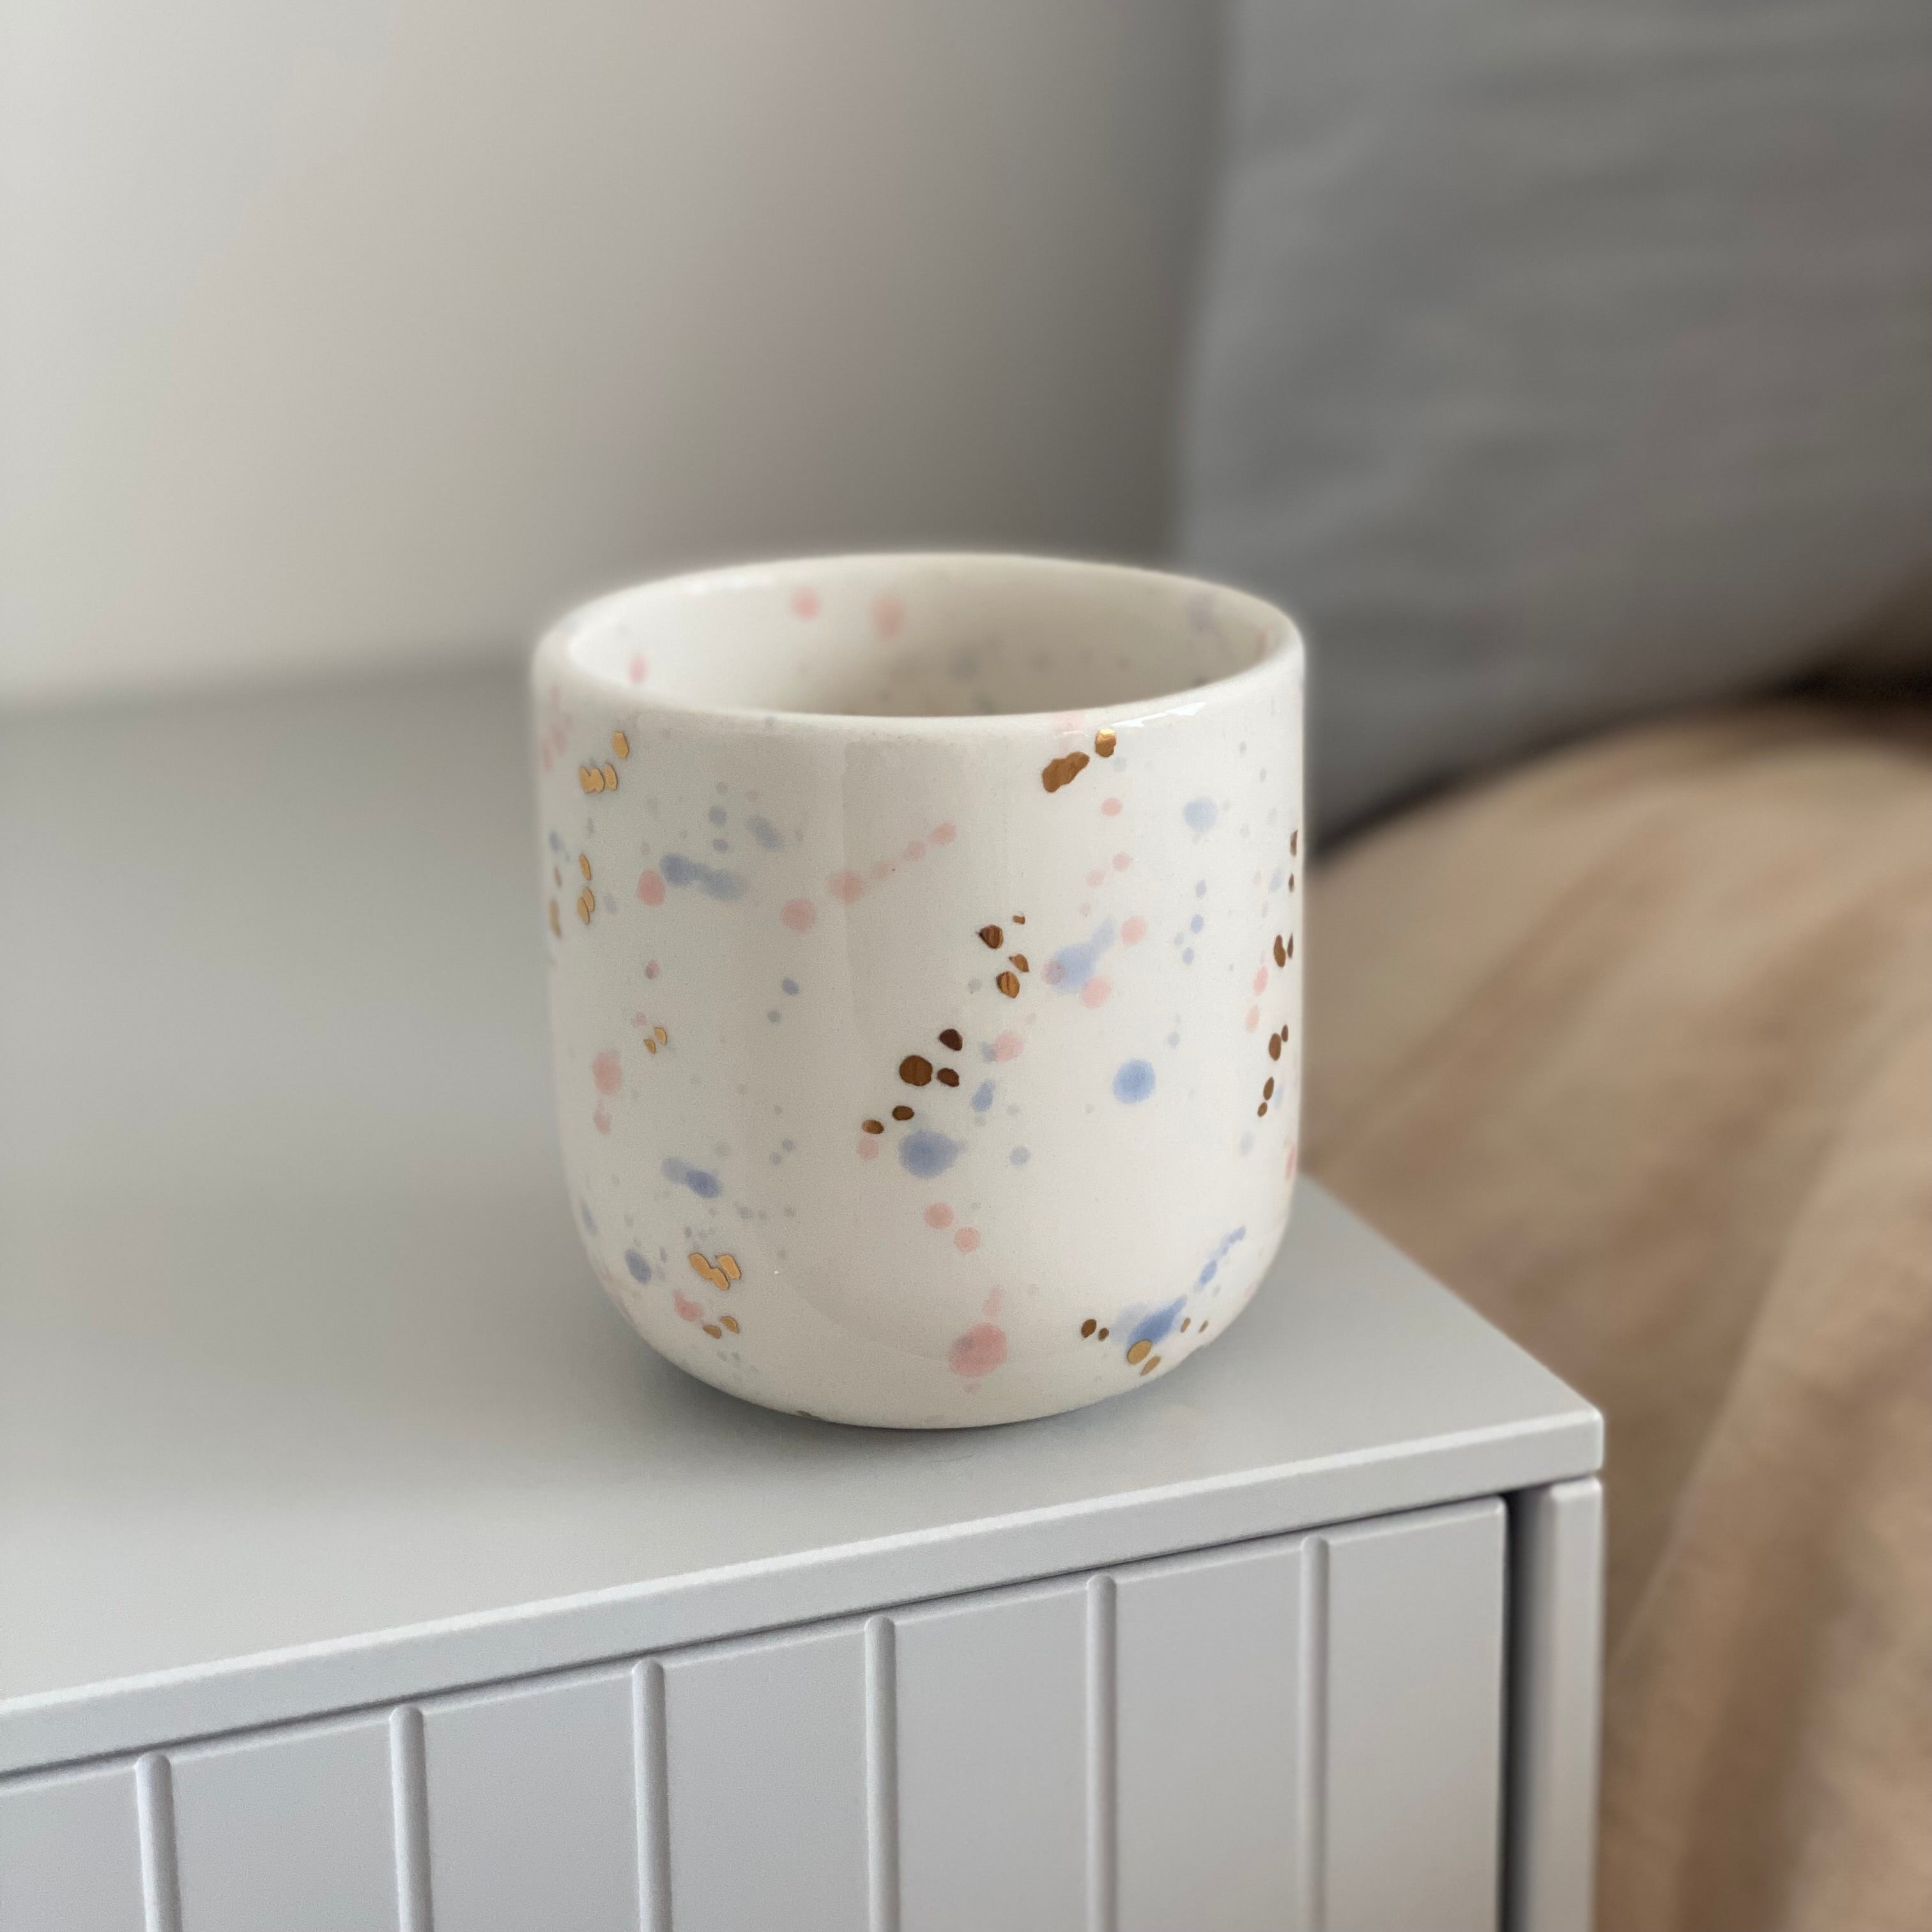 Marinski Heartmade latte cup speckles - celestial blues, pink and gold